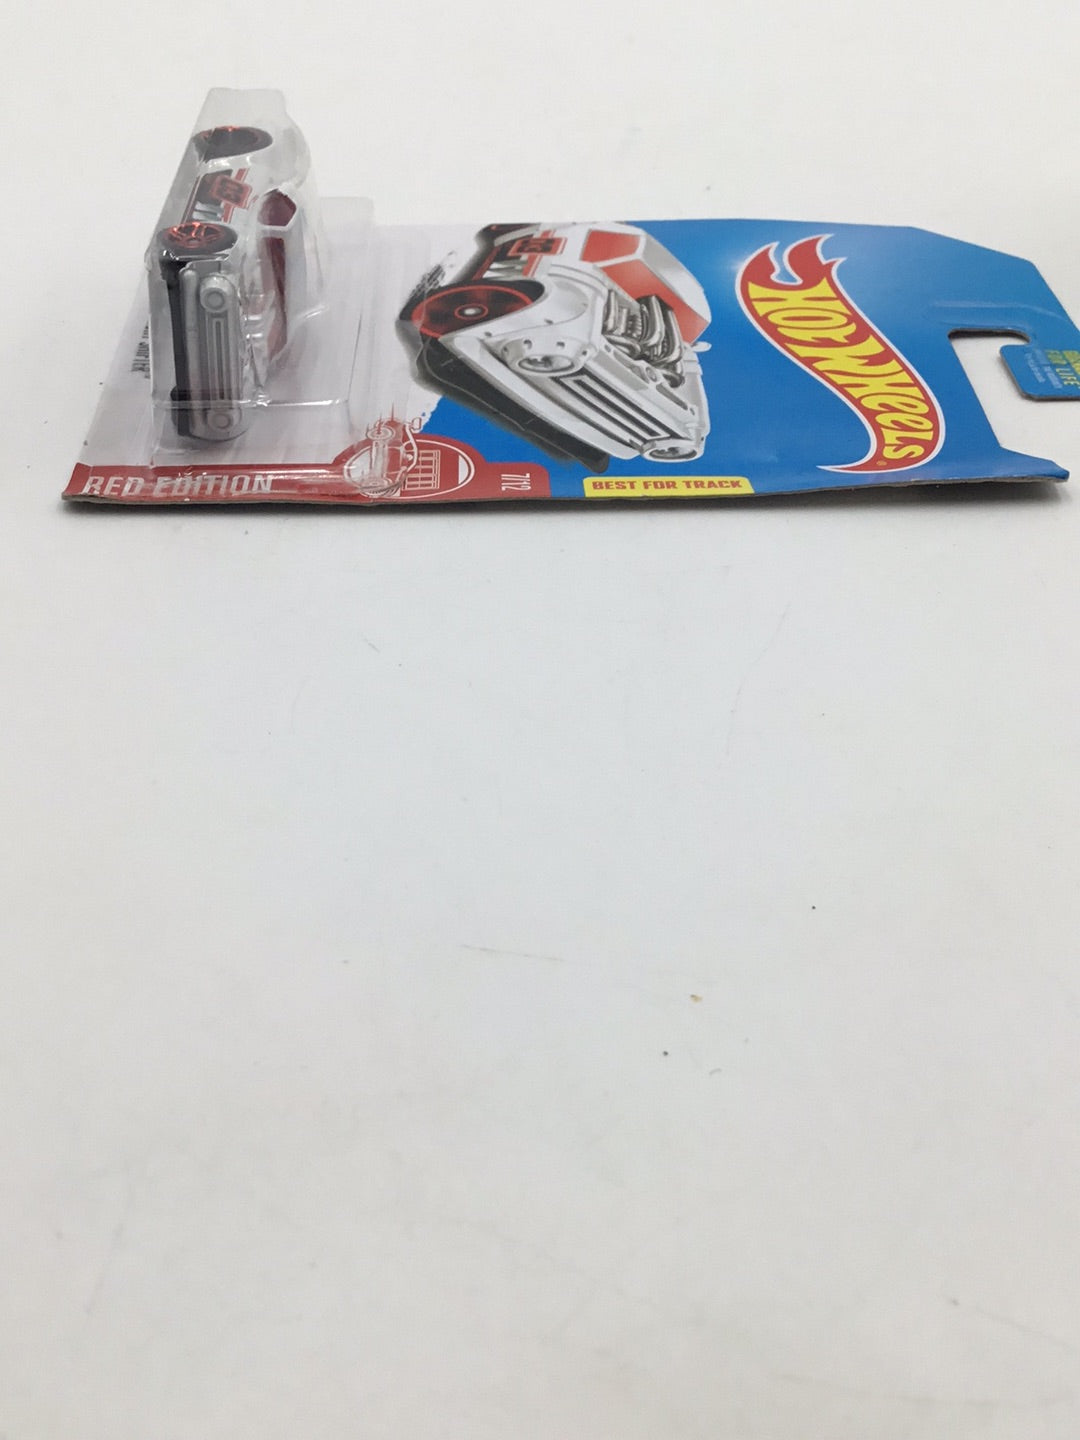 2018 hot wheels red edition #7 Night Shifter target red (Bad Card) Y7